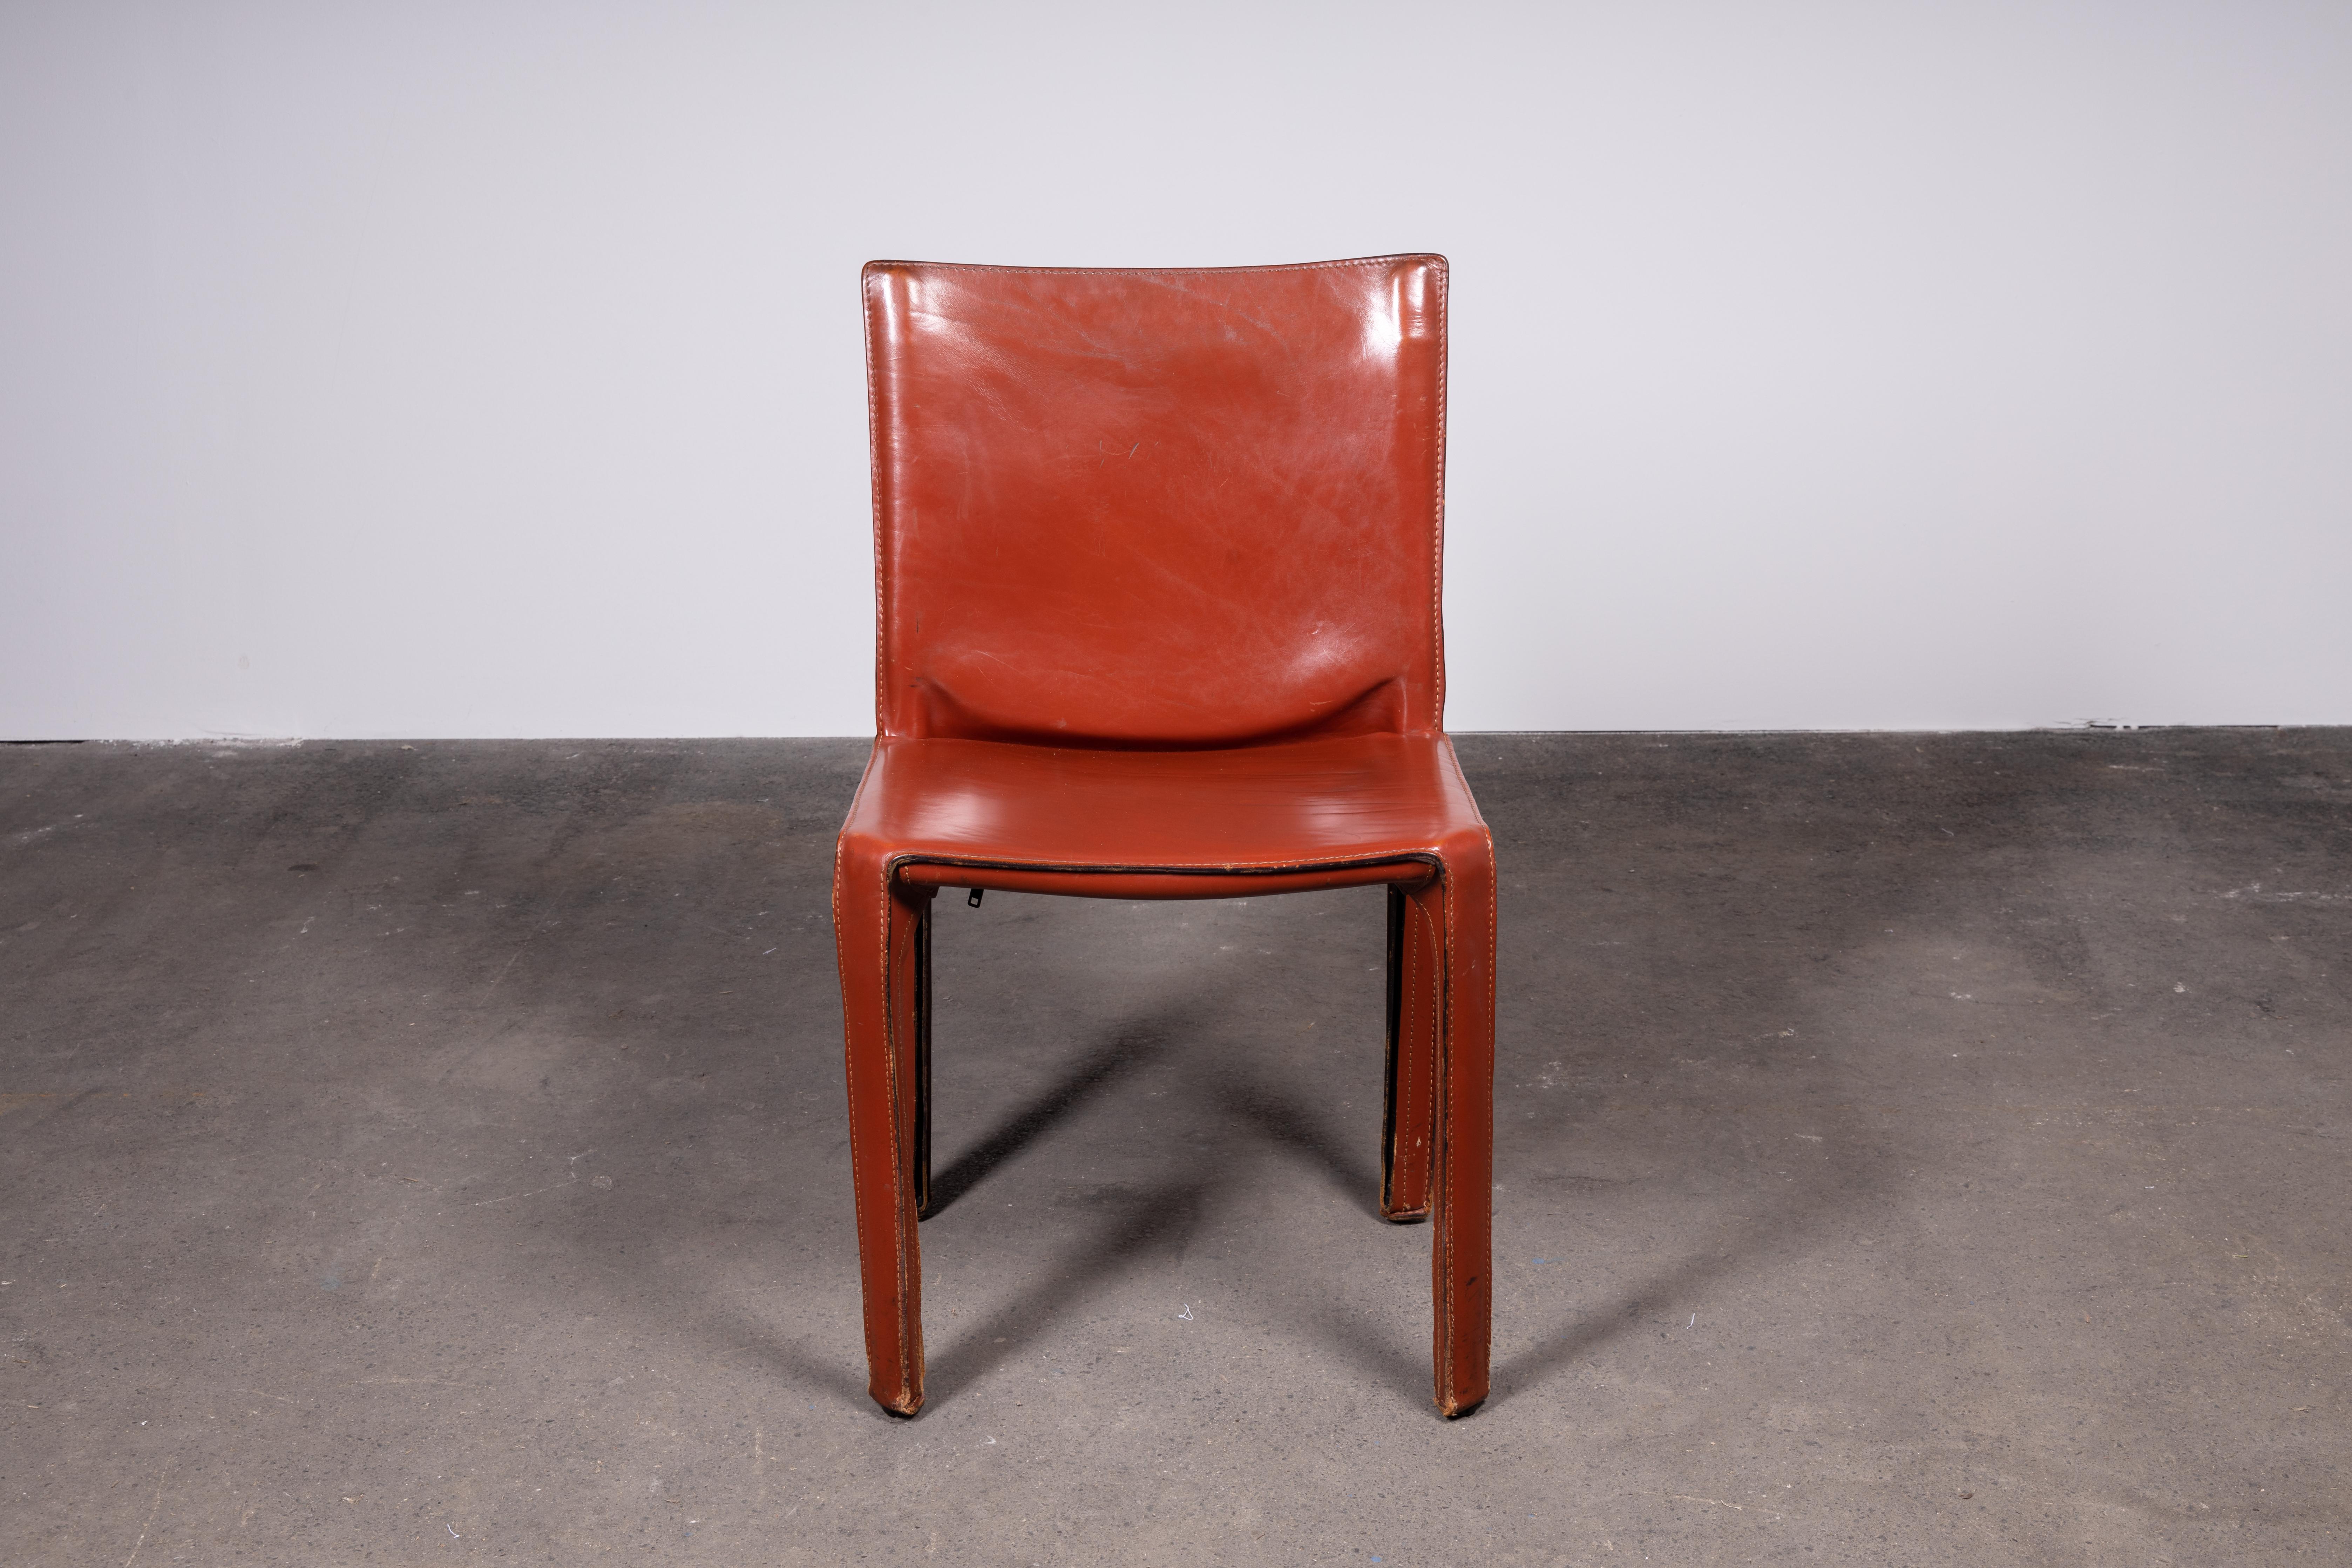 Two sets of two (or one set of 4) cognac Mario Bellini cab 412 chairs, made by Cassina in the 1980s. Flexible steel frame covered with a skin of high quality cognac saddle leather. This elegant, versatile chair is equally suitable for the dining